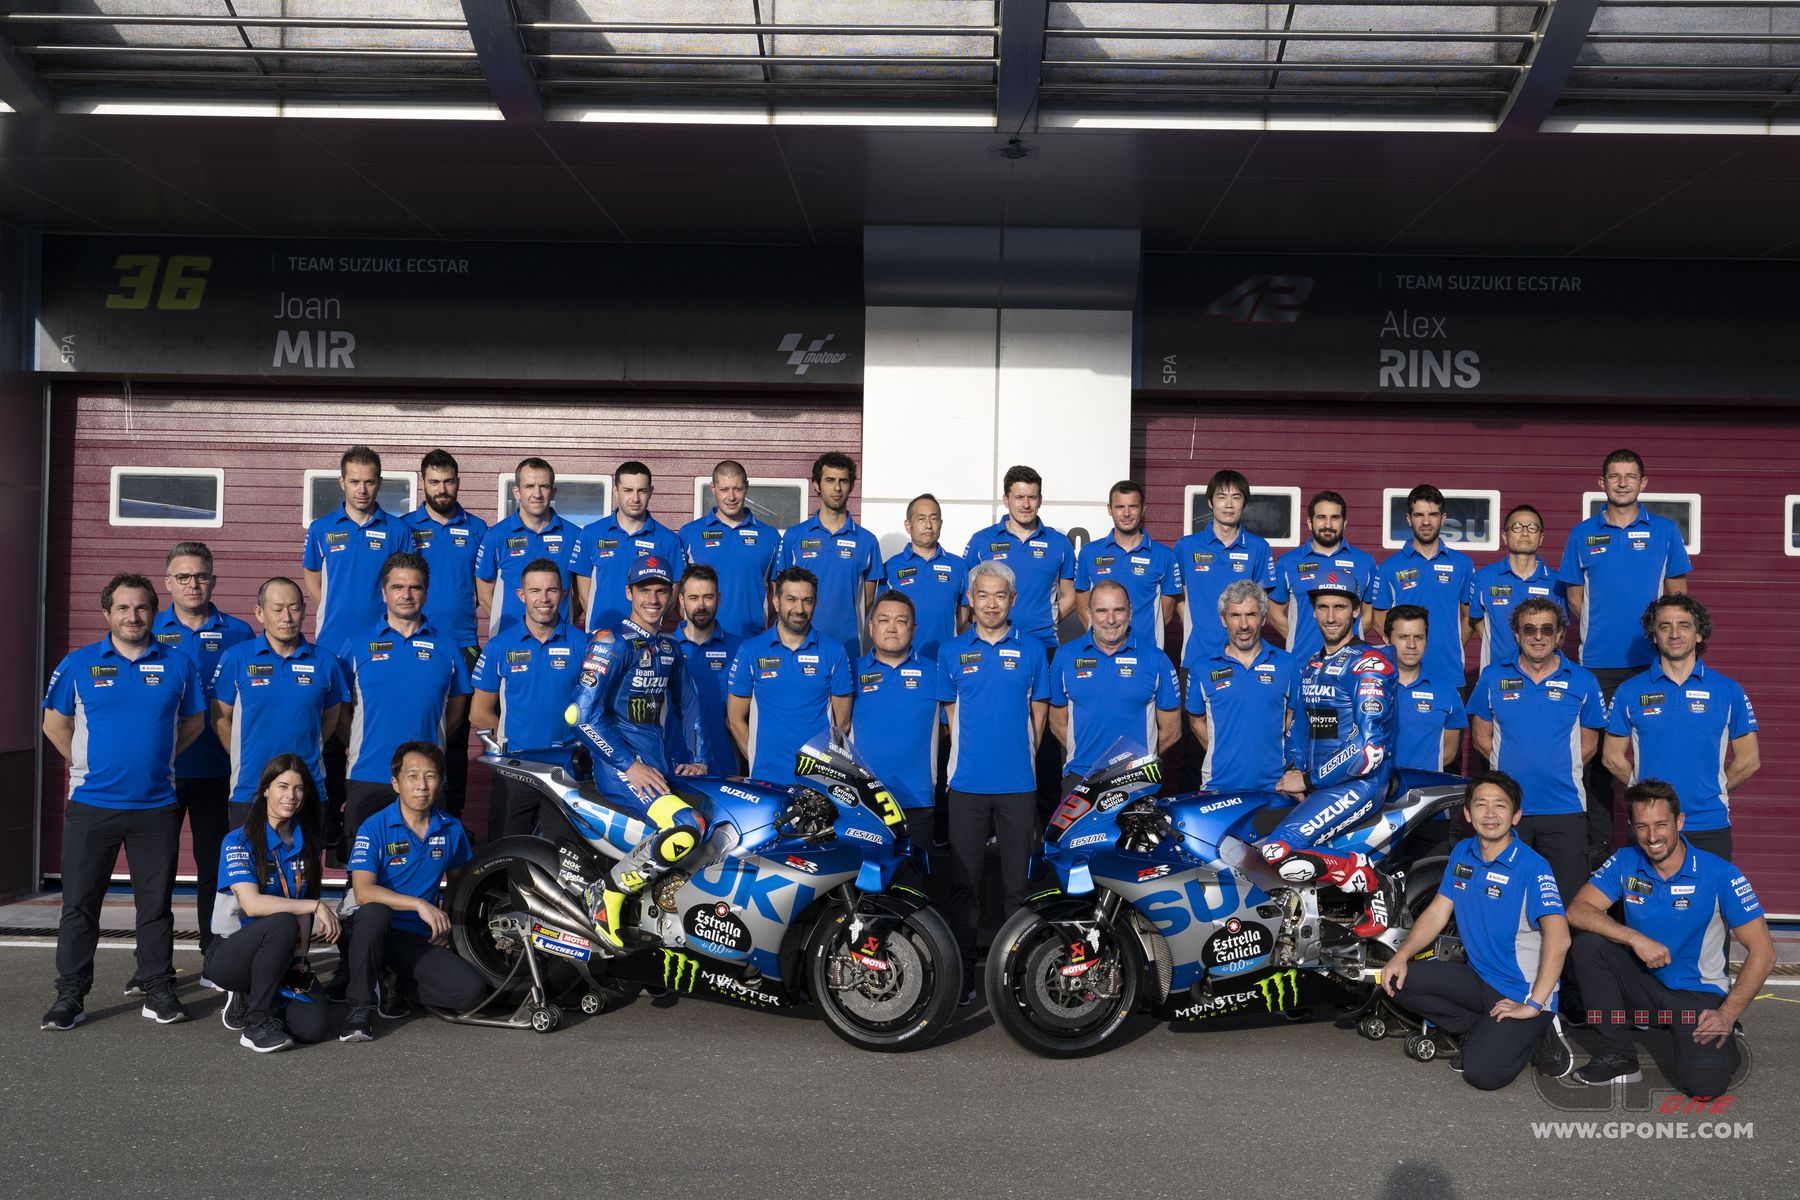 A view of the Suzuki team and Suzuki supersport machines decked out for the MotoGP track - machines that will soon e defunct with Suzuki's decision to temporarily suspend their acticitive on the circuit in a purported to save funds